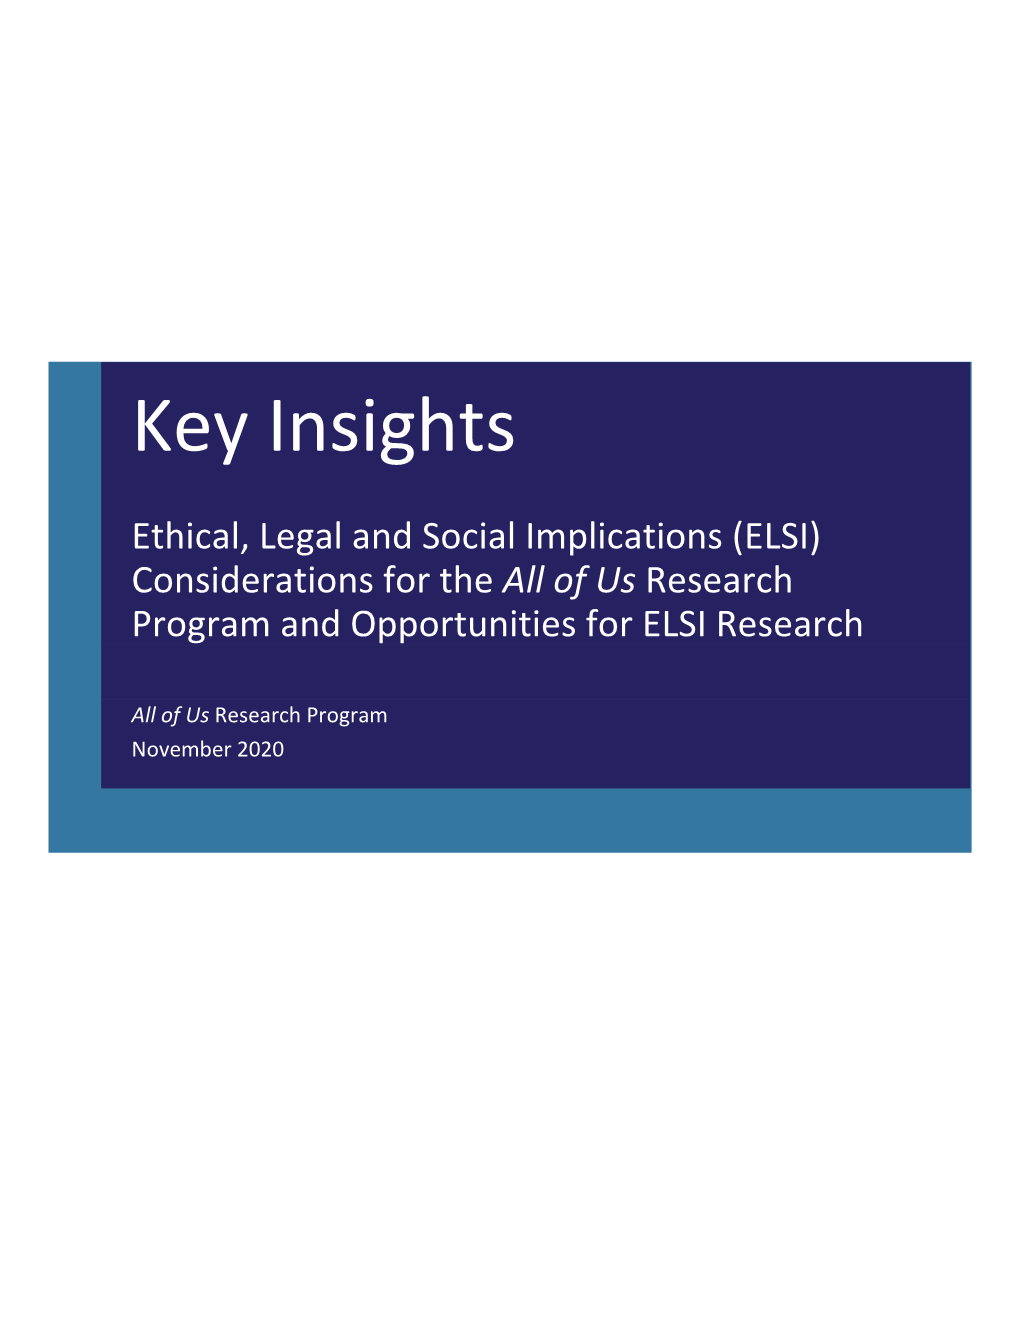 Key Insights: Ethical, Legal and Social Implications (ELSI)